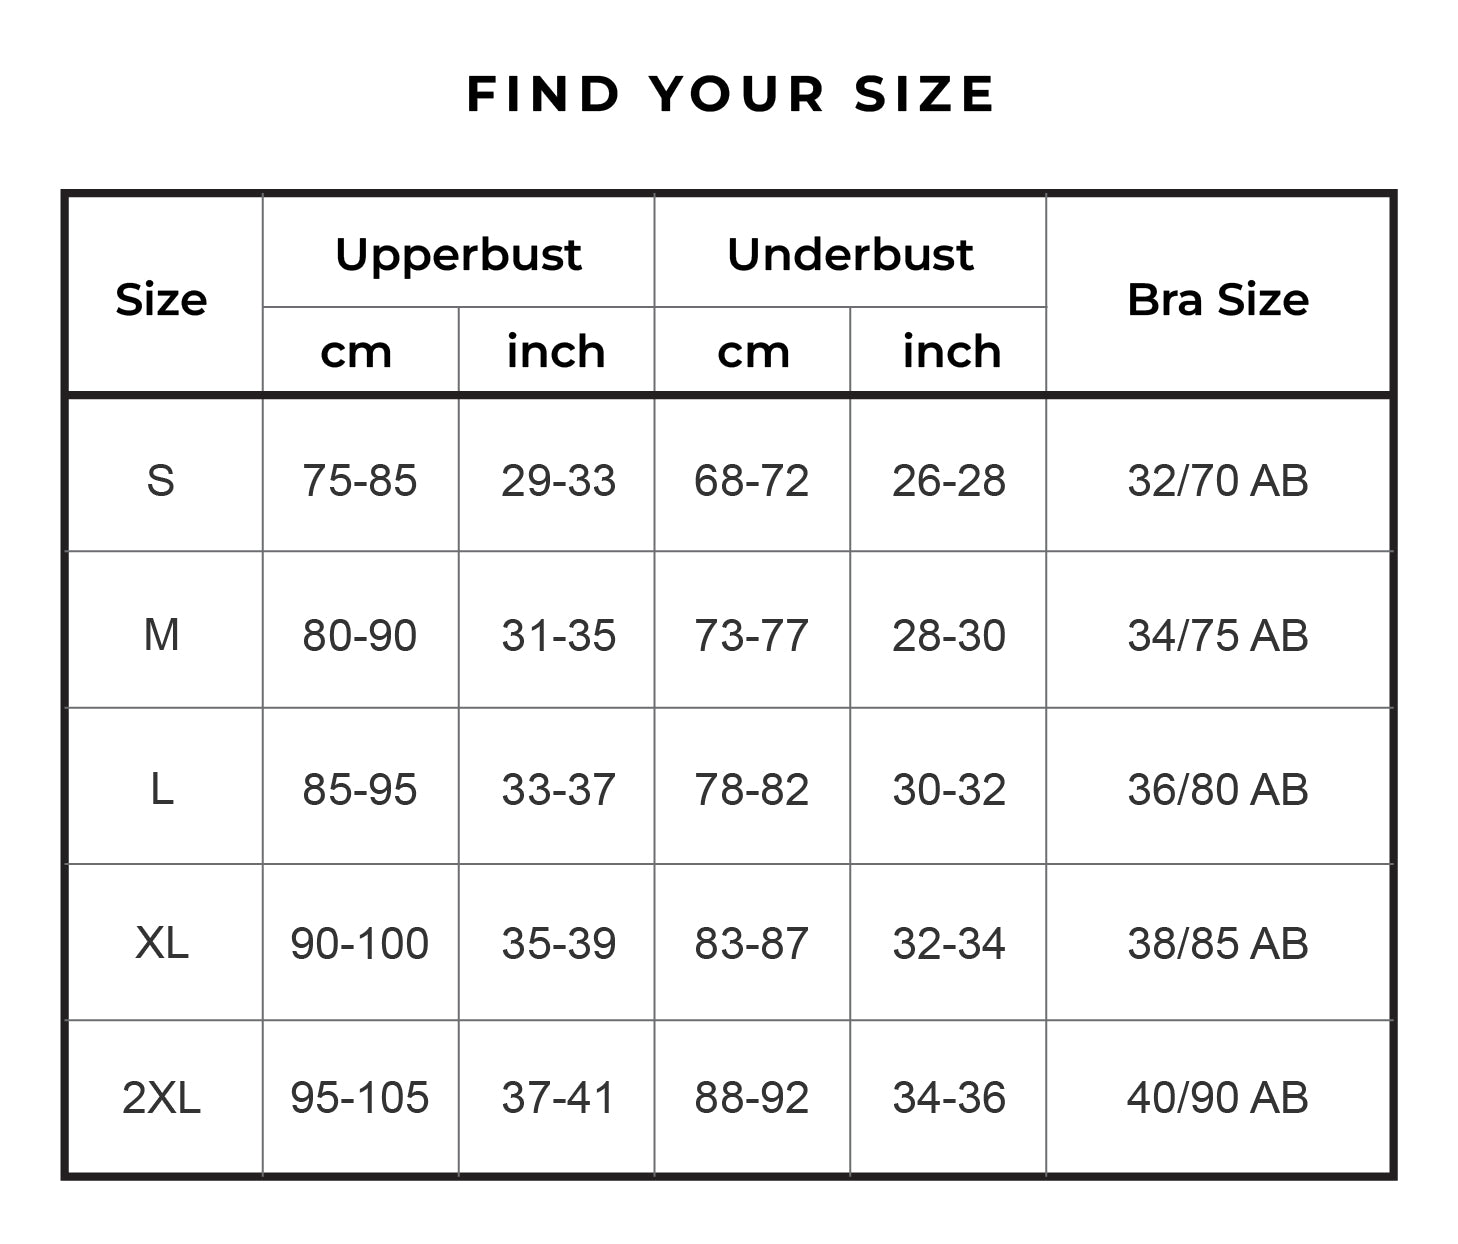 Sizing chart for Chantelle's Secret Tri-Cup Daily Seamless Bra, displaying size ranges in both centimeters and inches for upperbust and underbust measurements, corresponding to standard bra sizes from S to 2XL